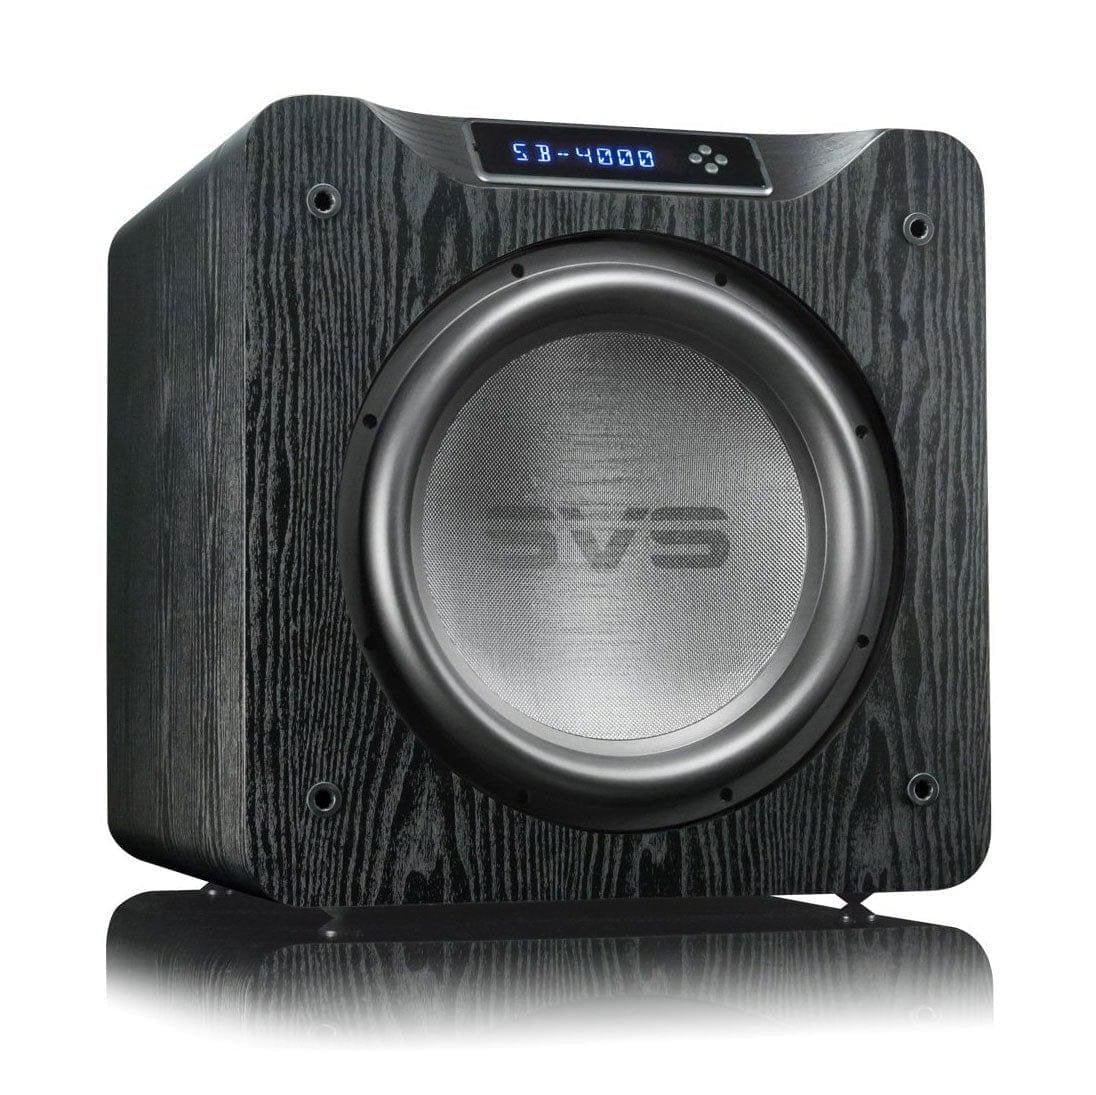 SVS Sound SVS Ultra 5.1ch Home Theatre Speaker Package with SB4000 Subwoofer Speaker Packages